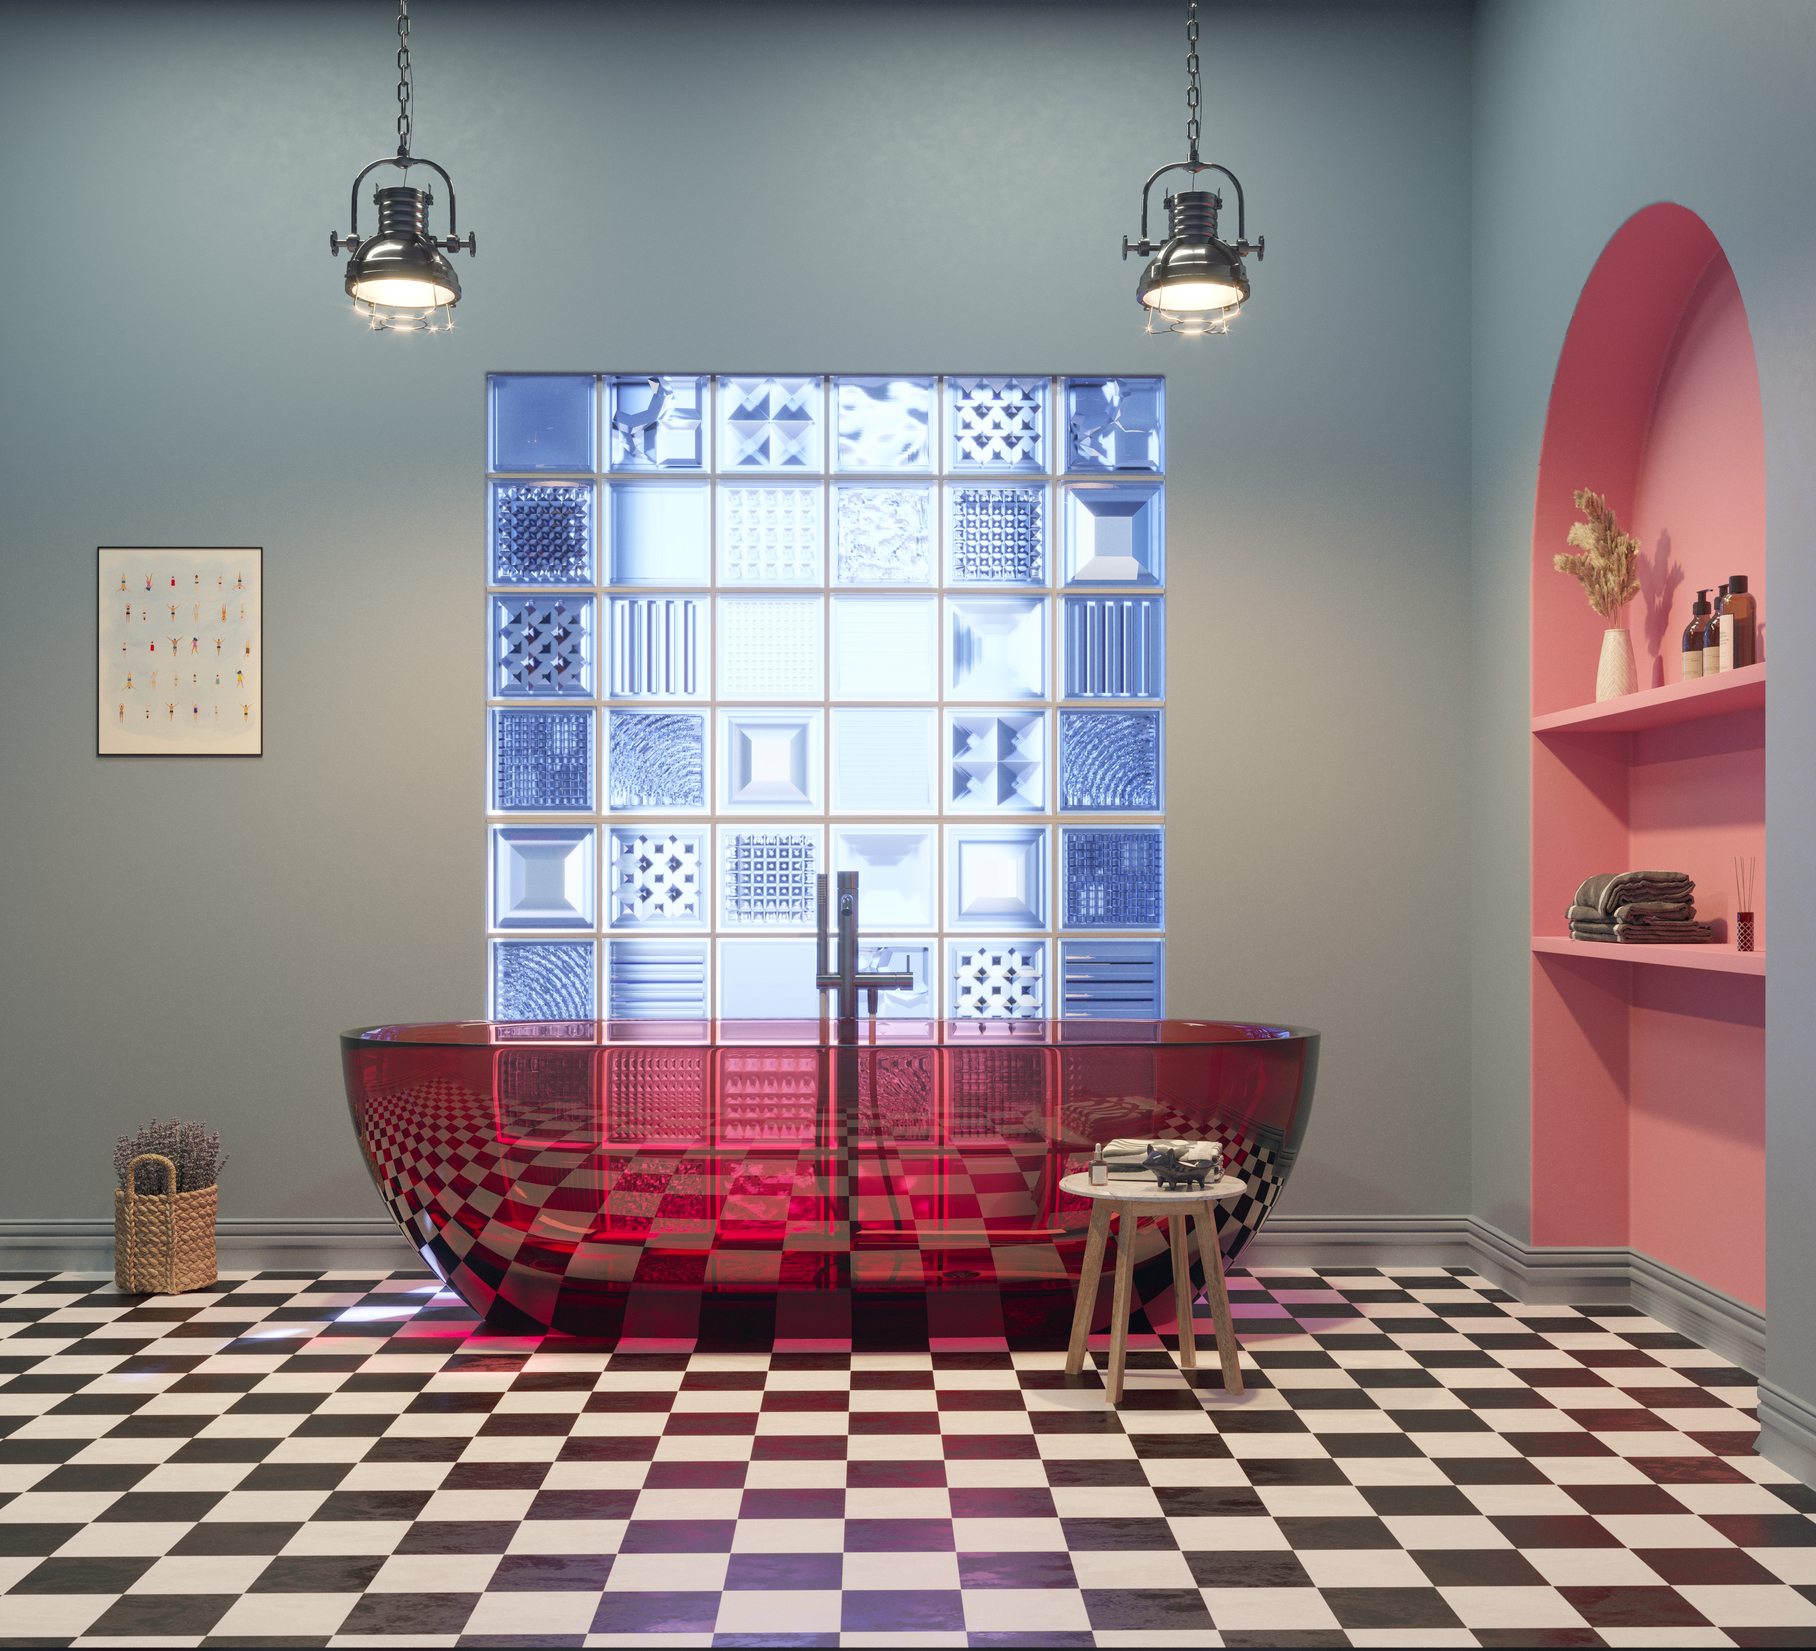 Room with checkered floor and glass brick shower, with pink accents and modern decor